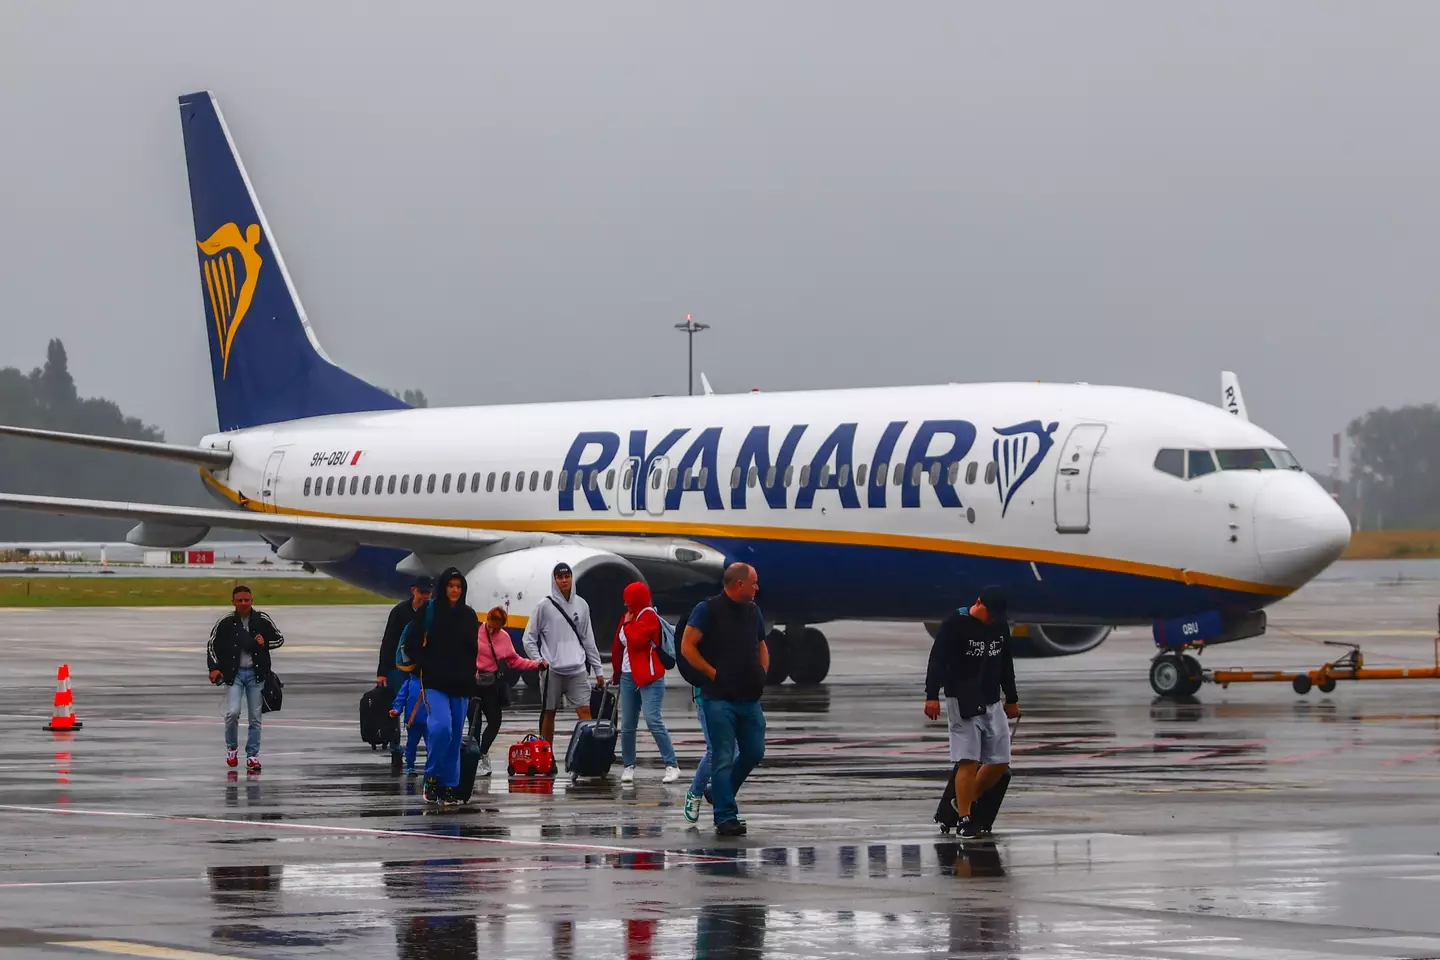 Passengers getting off a Ryanair aircraft.